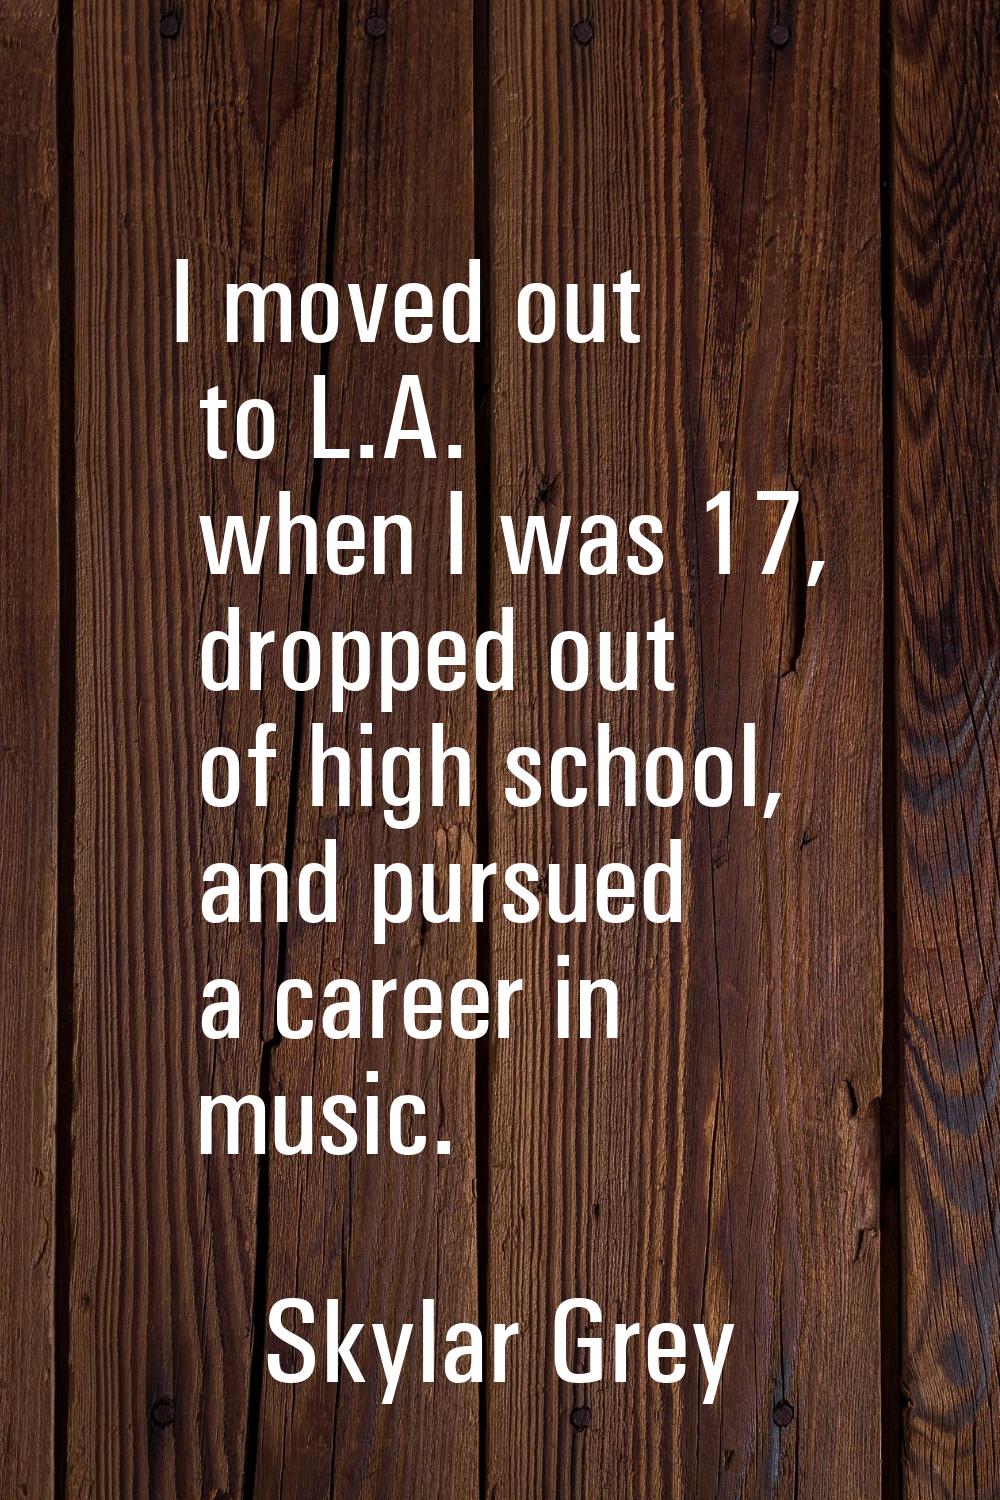 I moved out to L.A. when I was 17, dropped out of high school, and pursued a career in music.